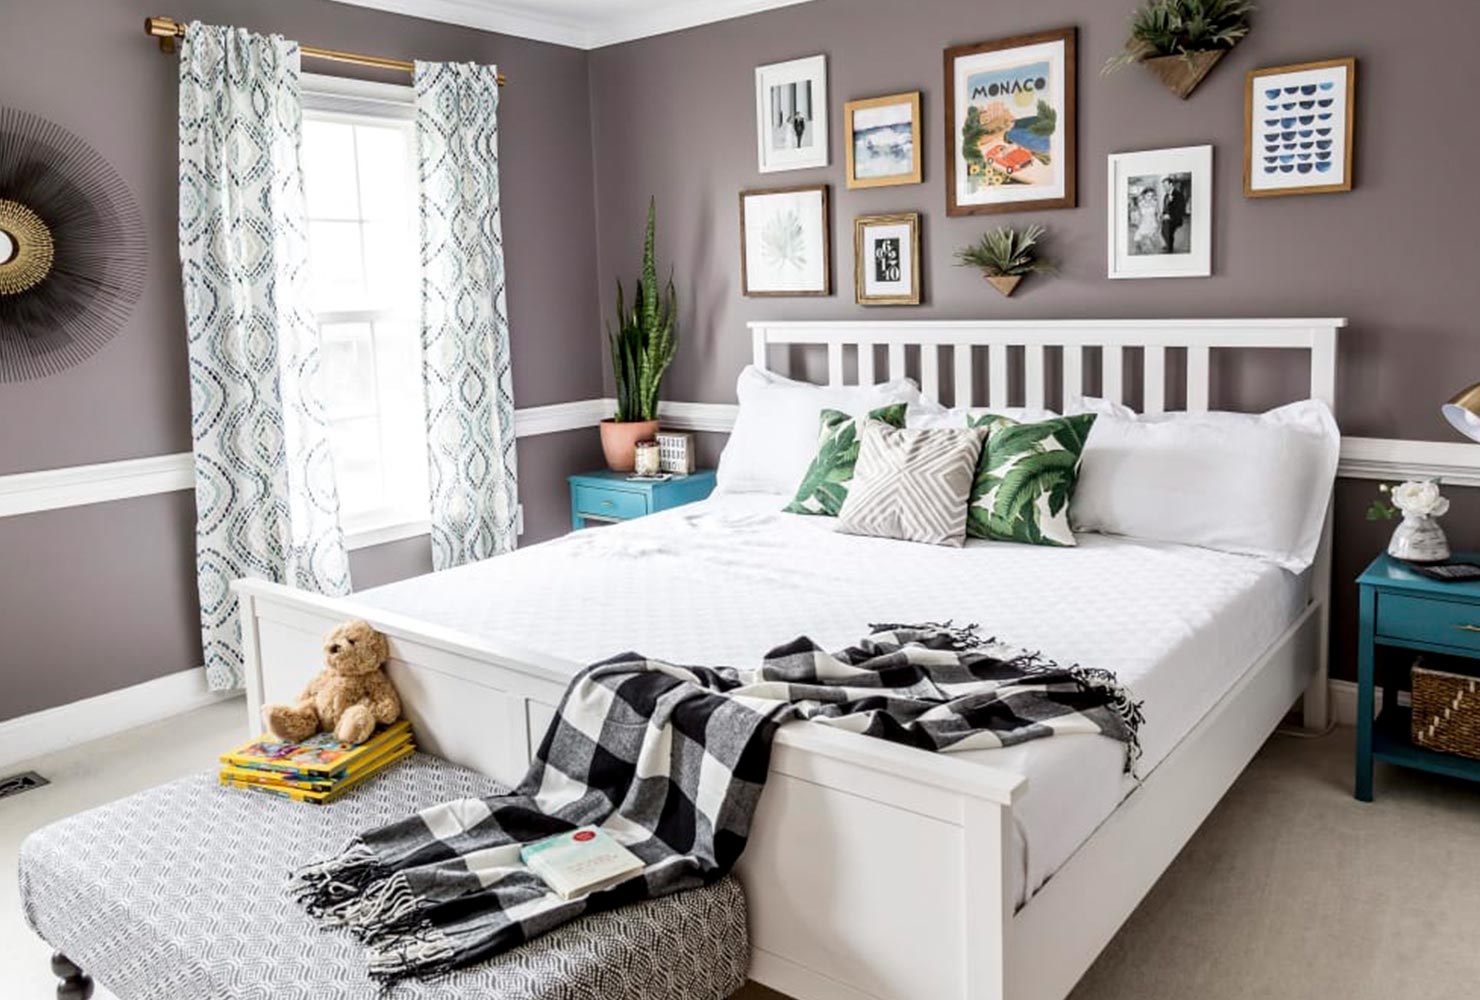 20 Ways To Decorate A Small Bedroom | Shutterfly